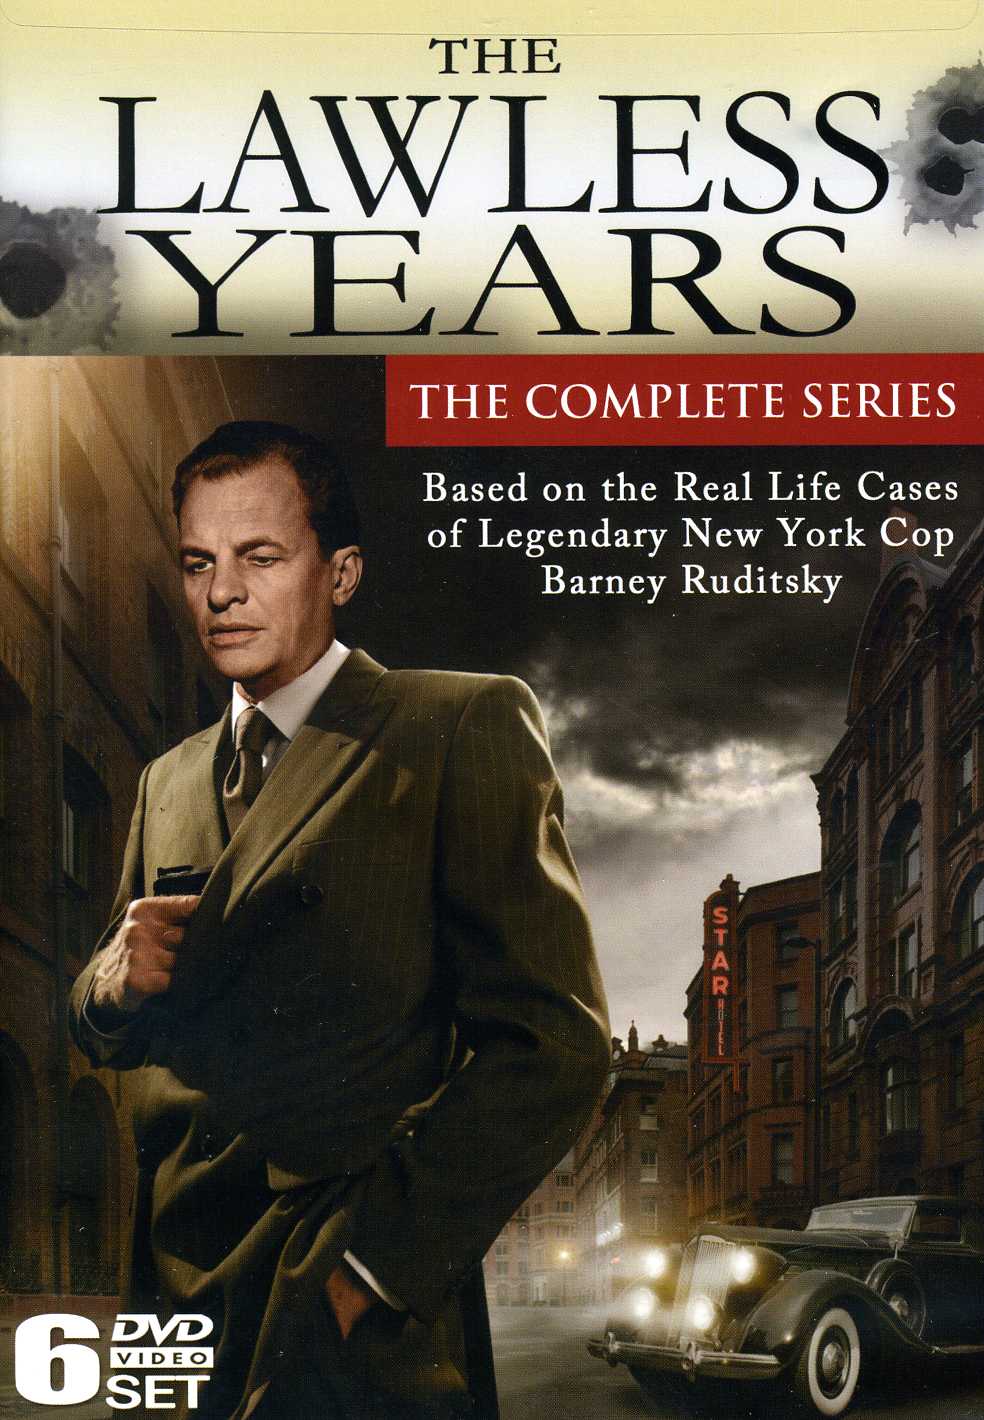 LAWLESS YEARS: THE COMPLETE SERIES (6PC)